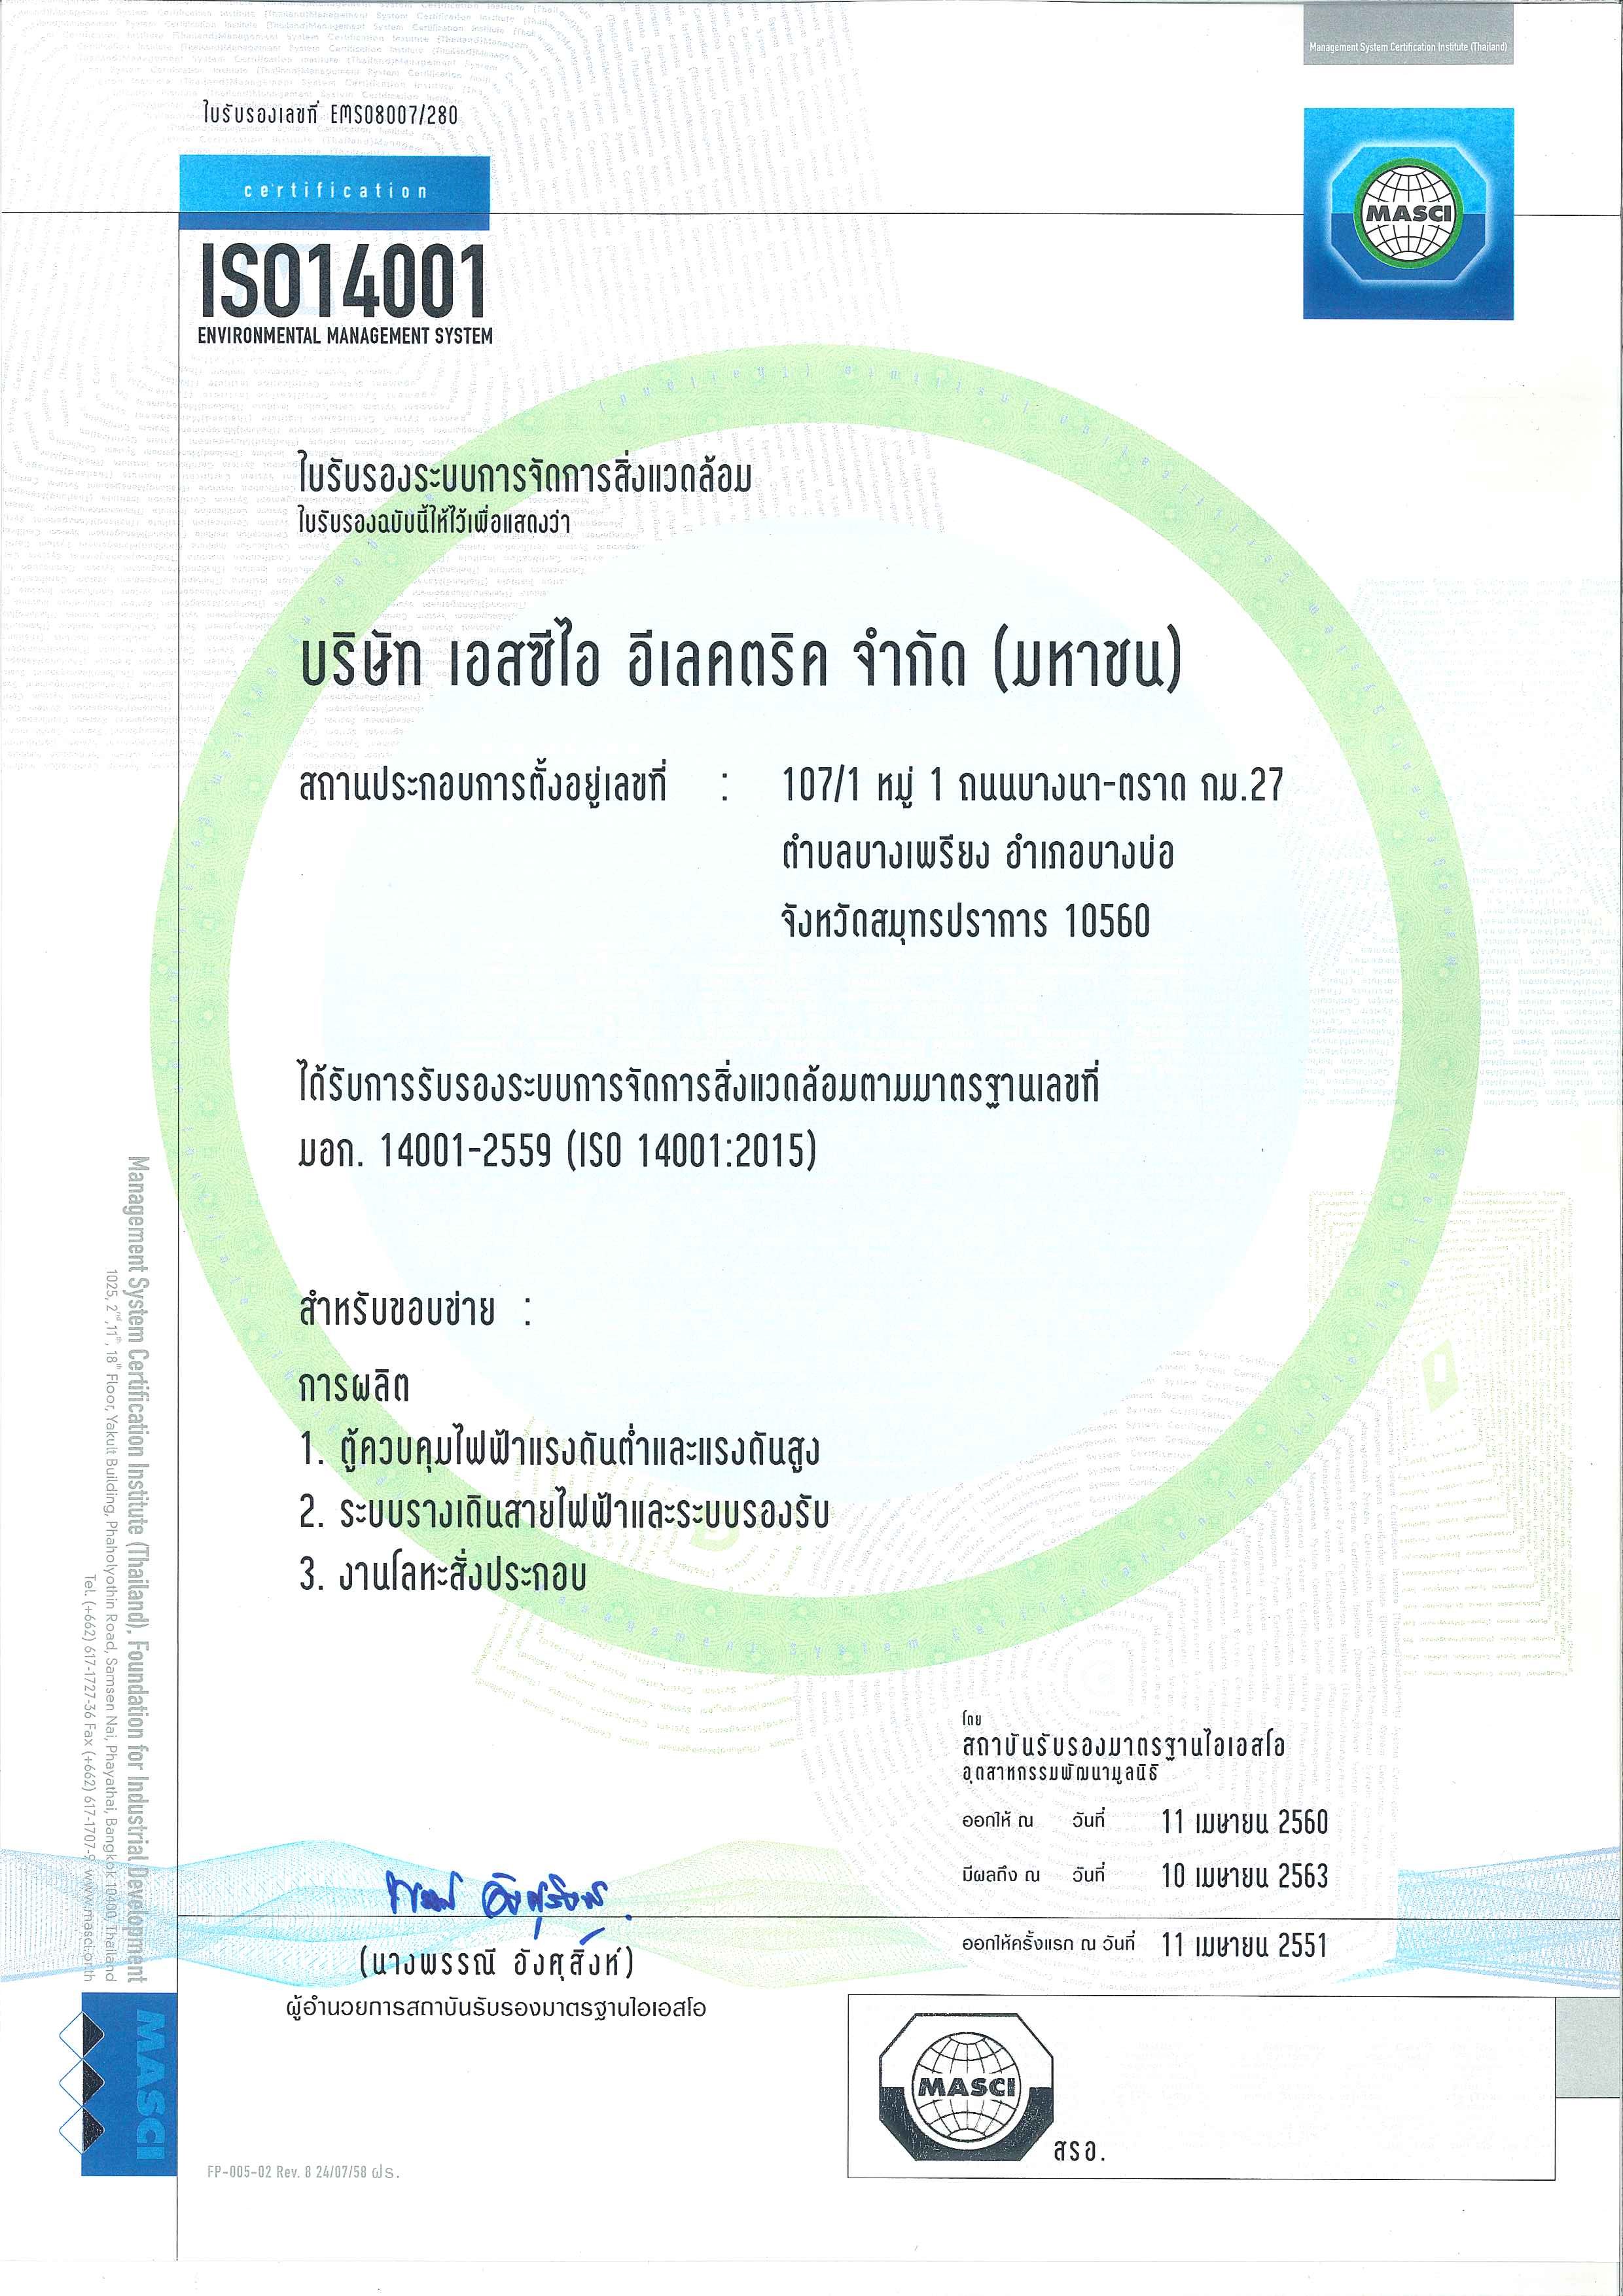 Environmental Management System ISO 14001 : 2015